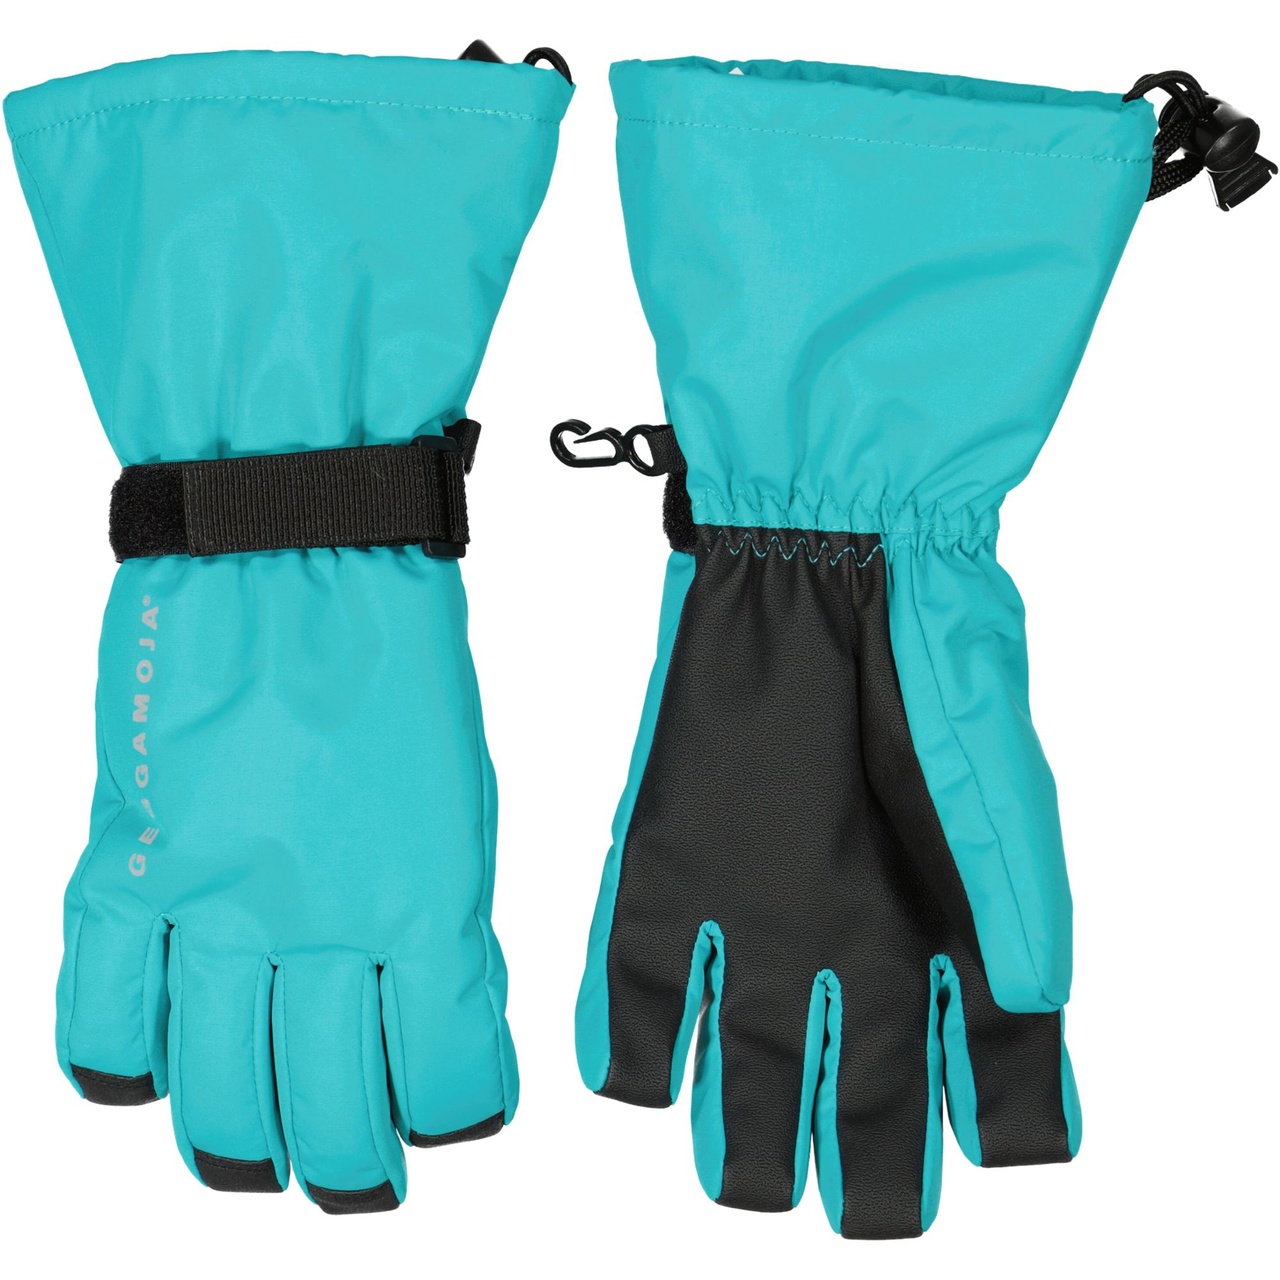 Winter gloves Turquoise  8-10